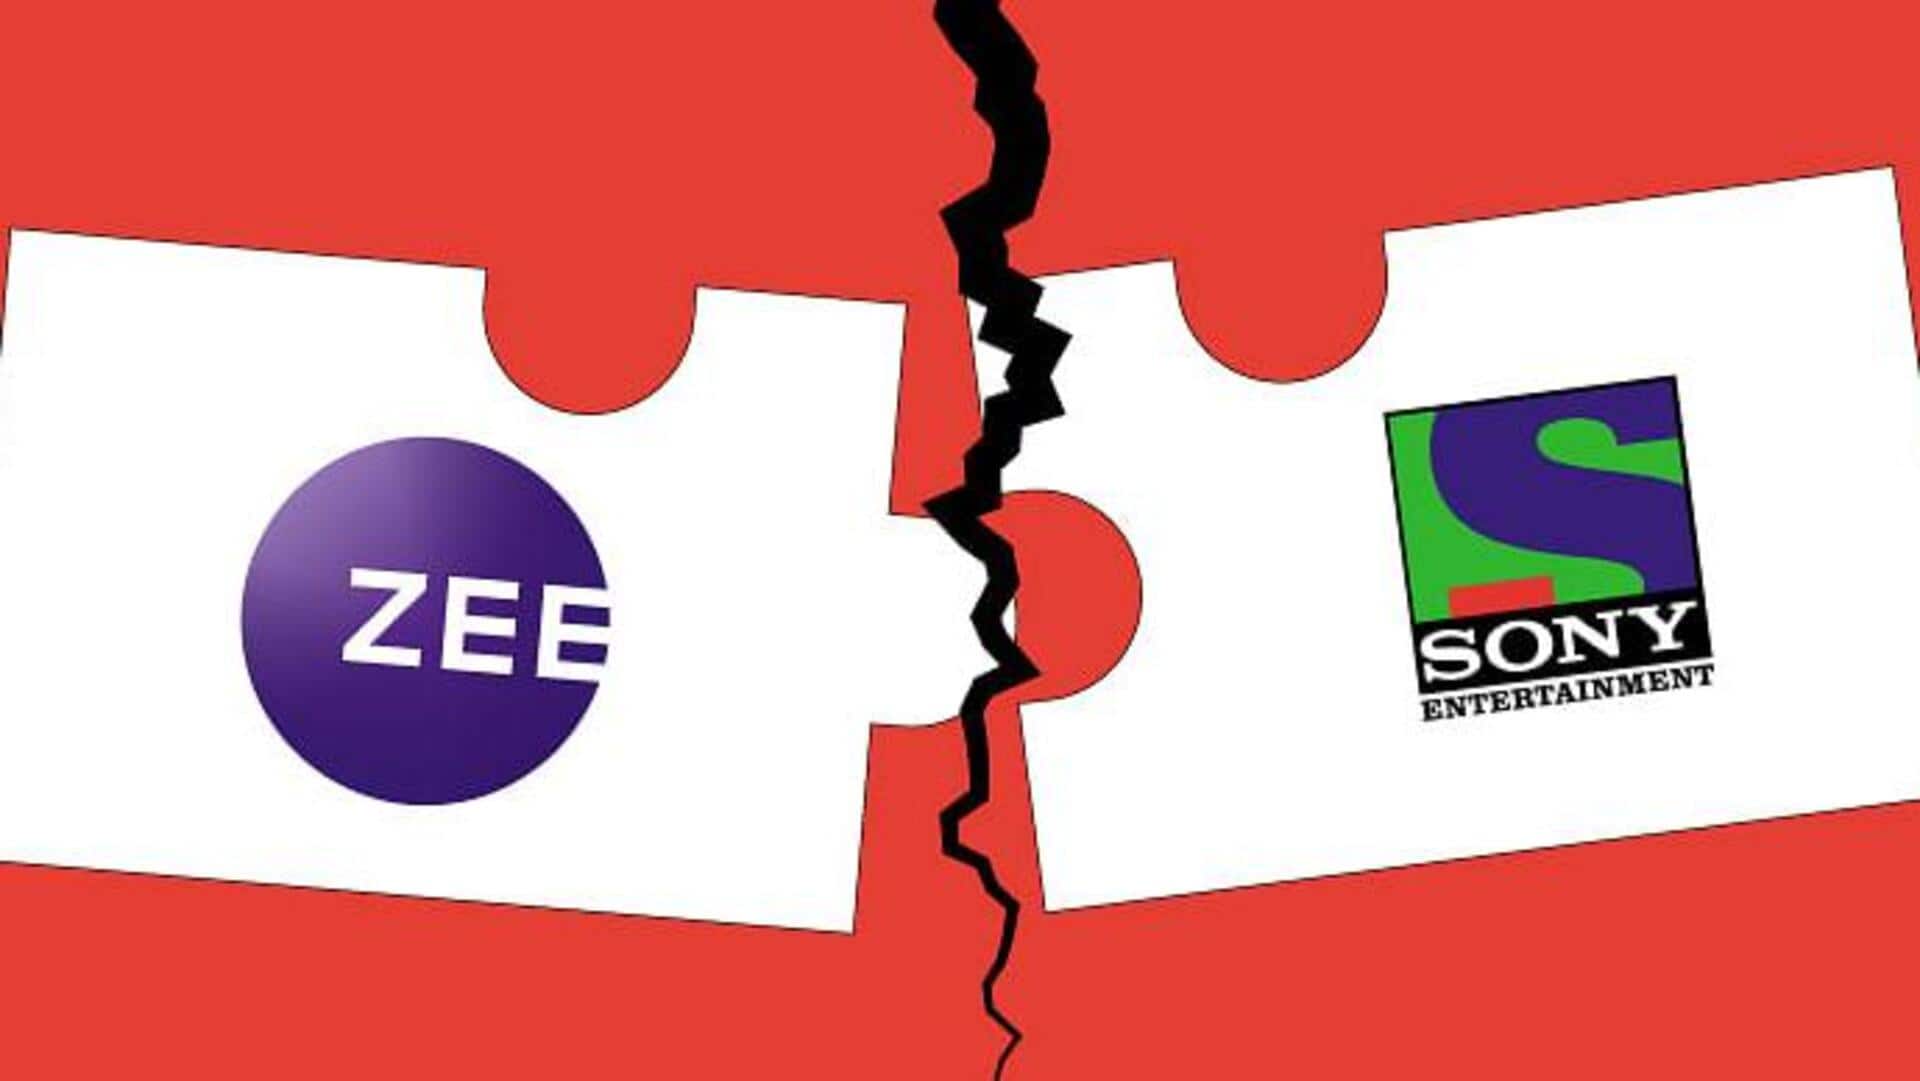 Zee to sue Sony for canceling merger deal